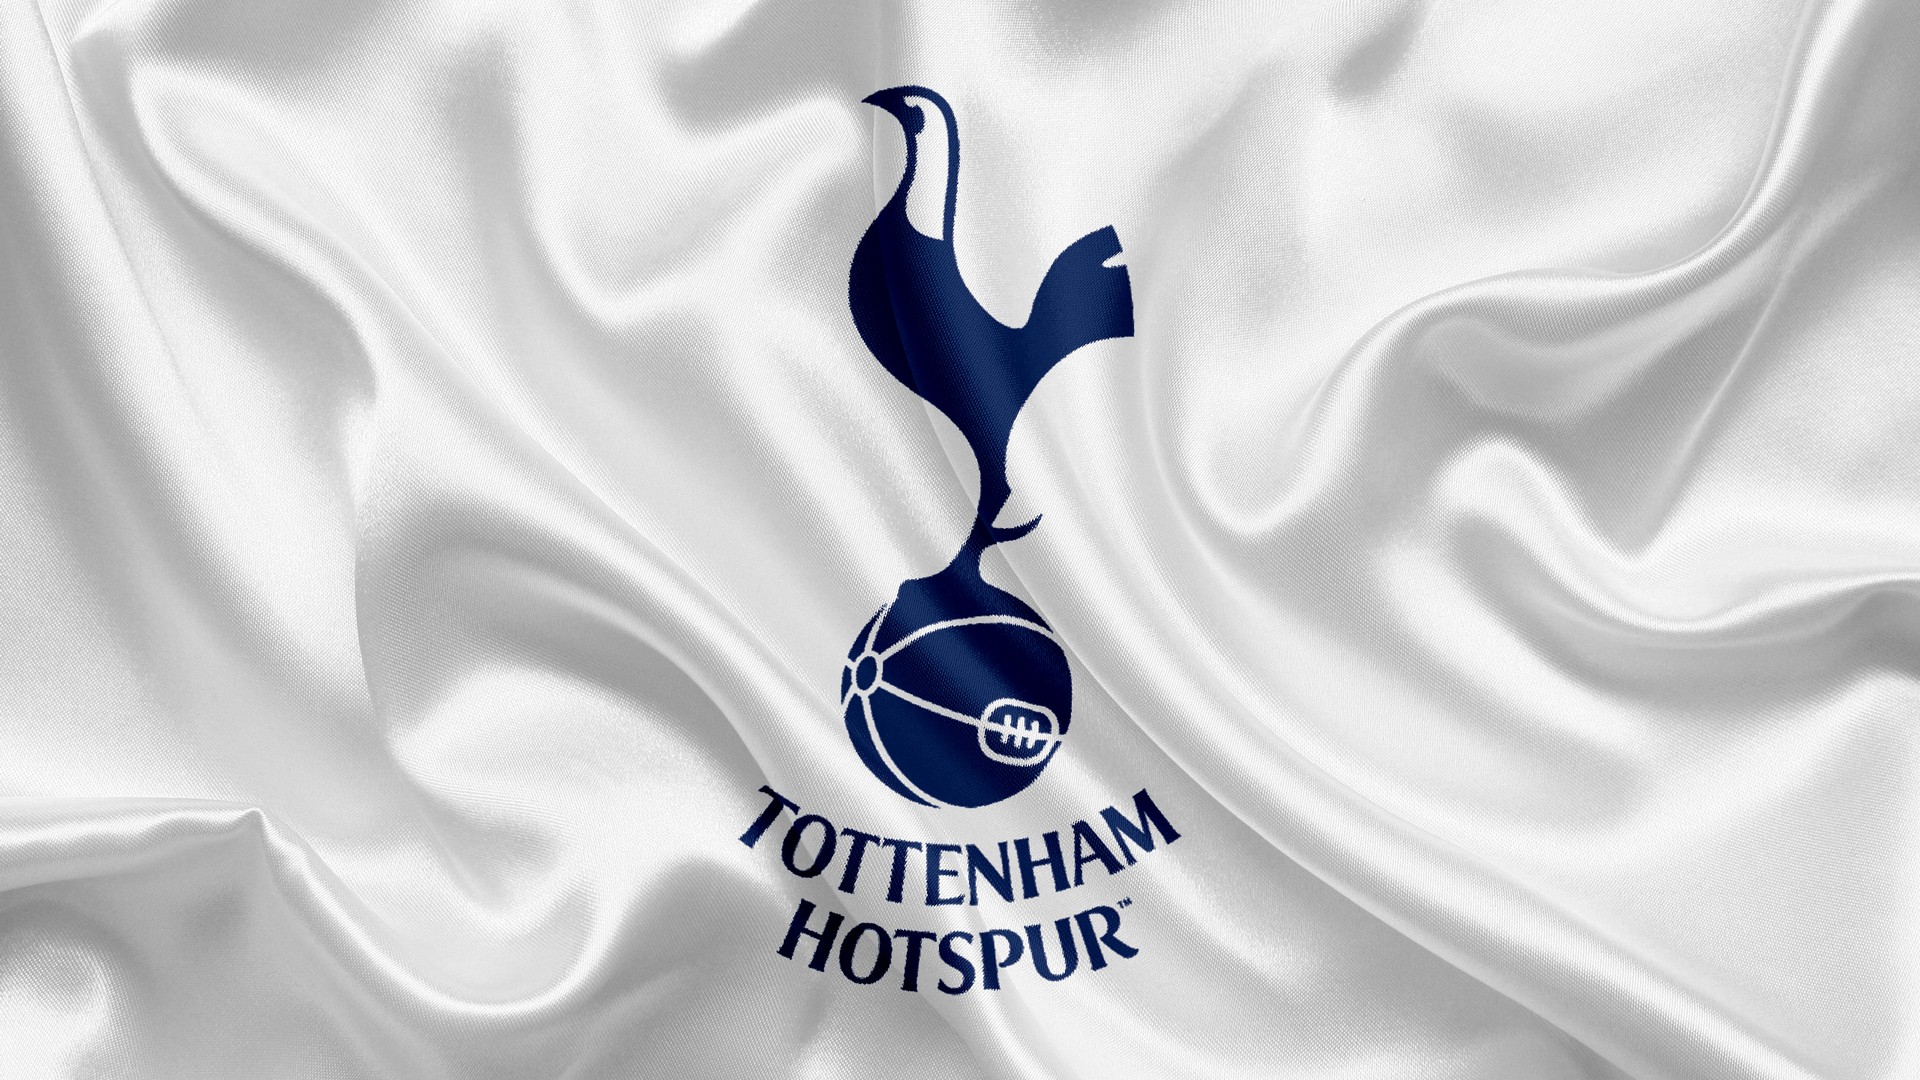 Tottenham Hotspur Wallpaper with high-resolution 1920x1080 pixel. You can use this wallpaper for your Desktop Computers, Mac Screensavers, Windows Backgrounds, iPhone Wallpapers, Tablet or Android Lock screen and another Mobile device